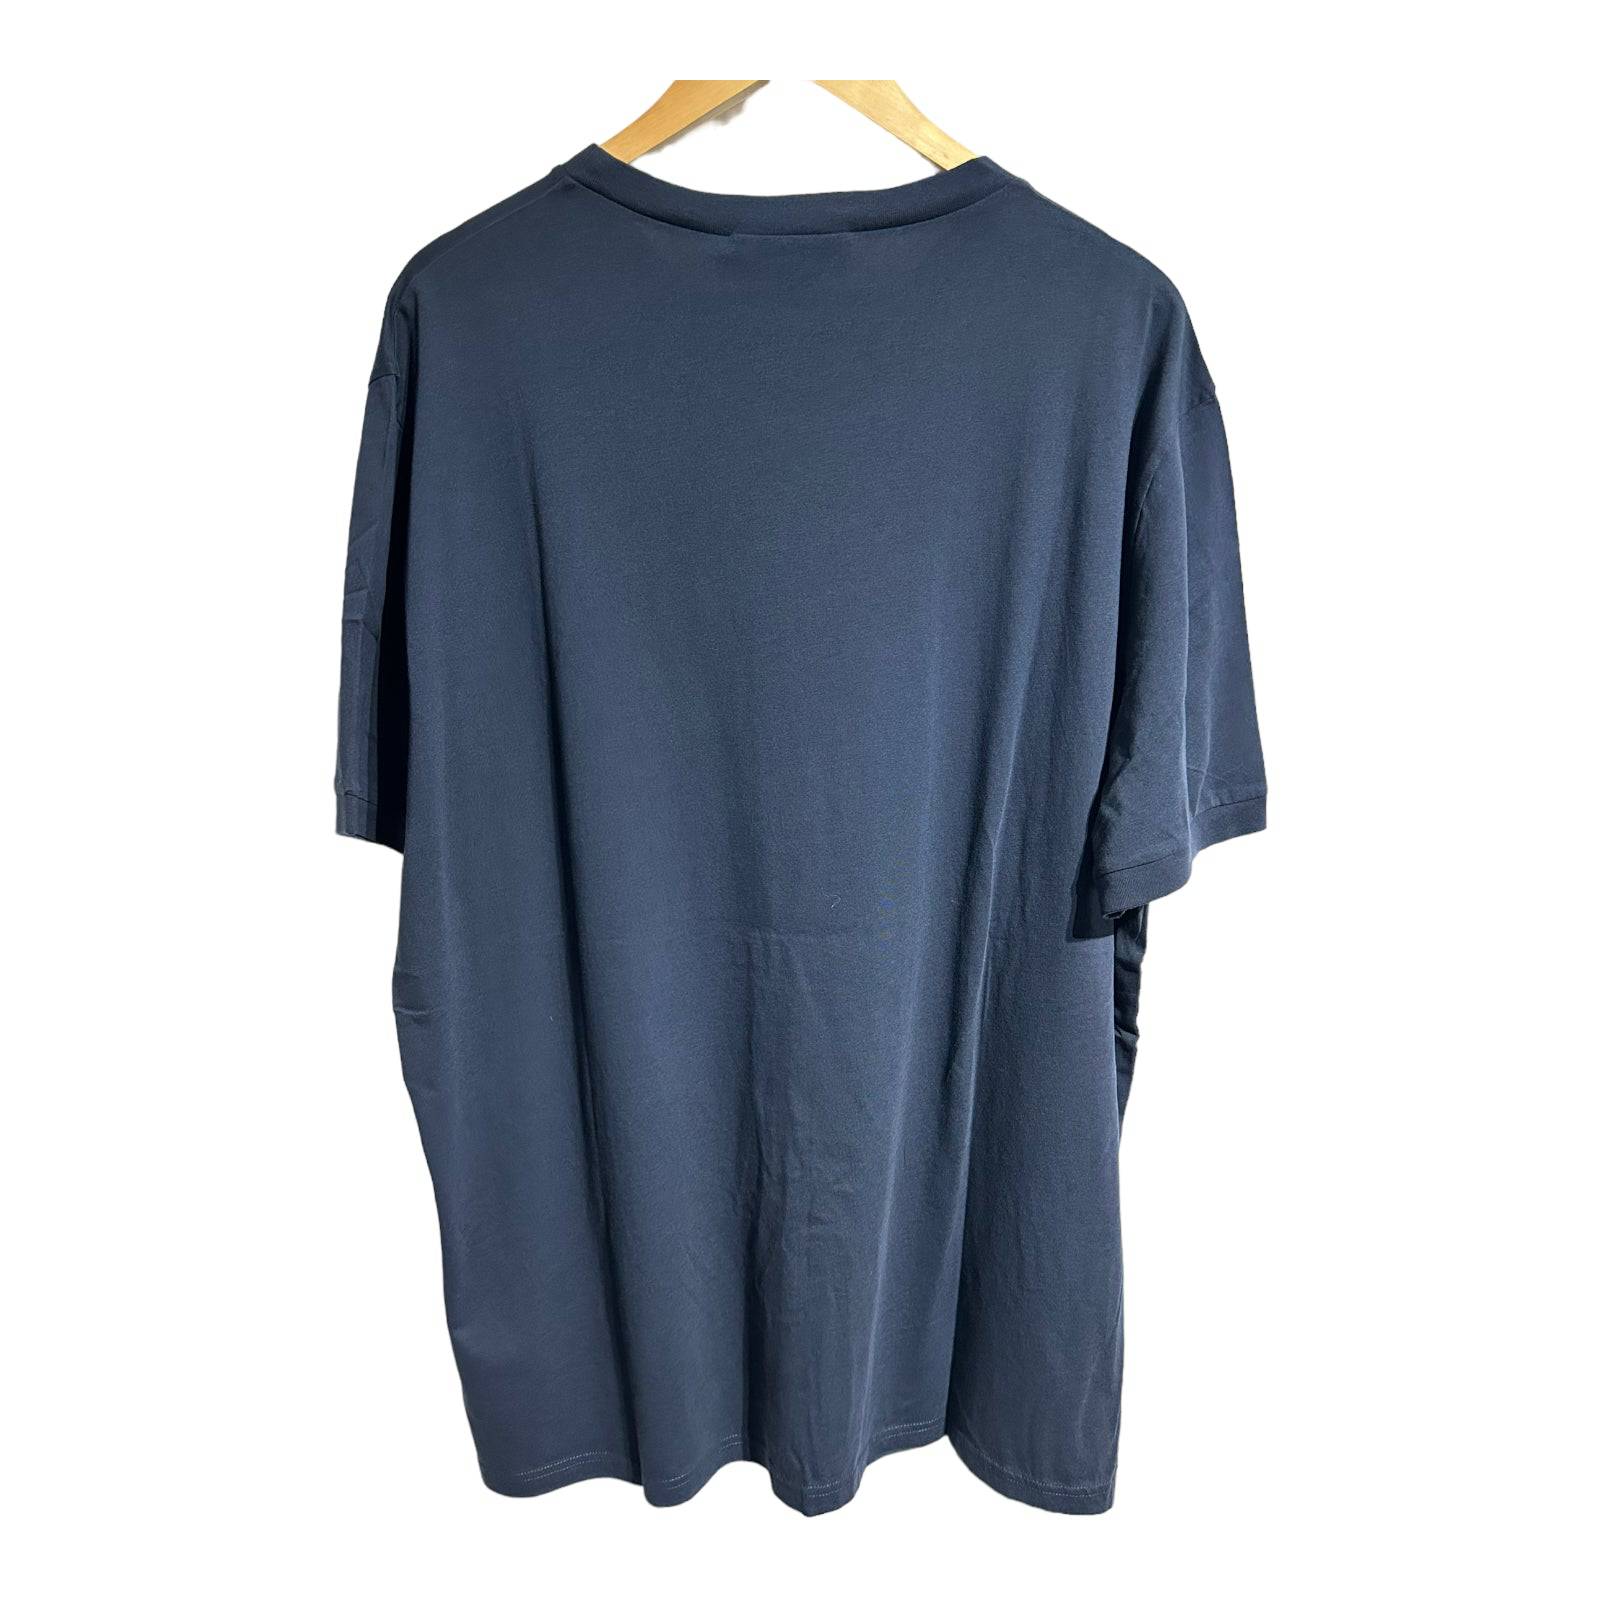 Vivienne Westwood Oversized 'Get a Life' T-Shirt - Recurring.Life